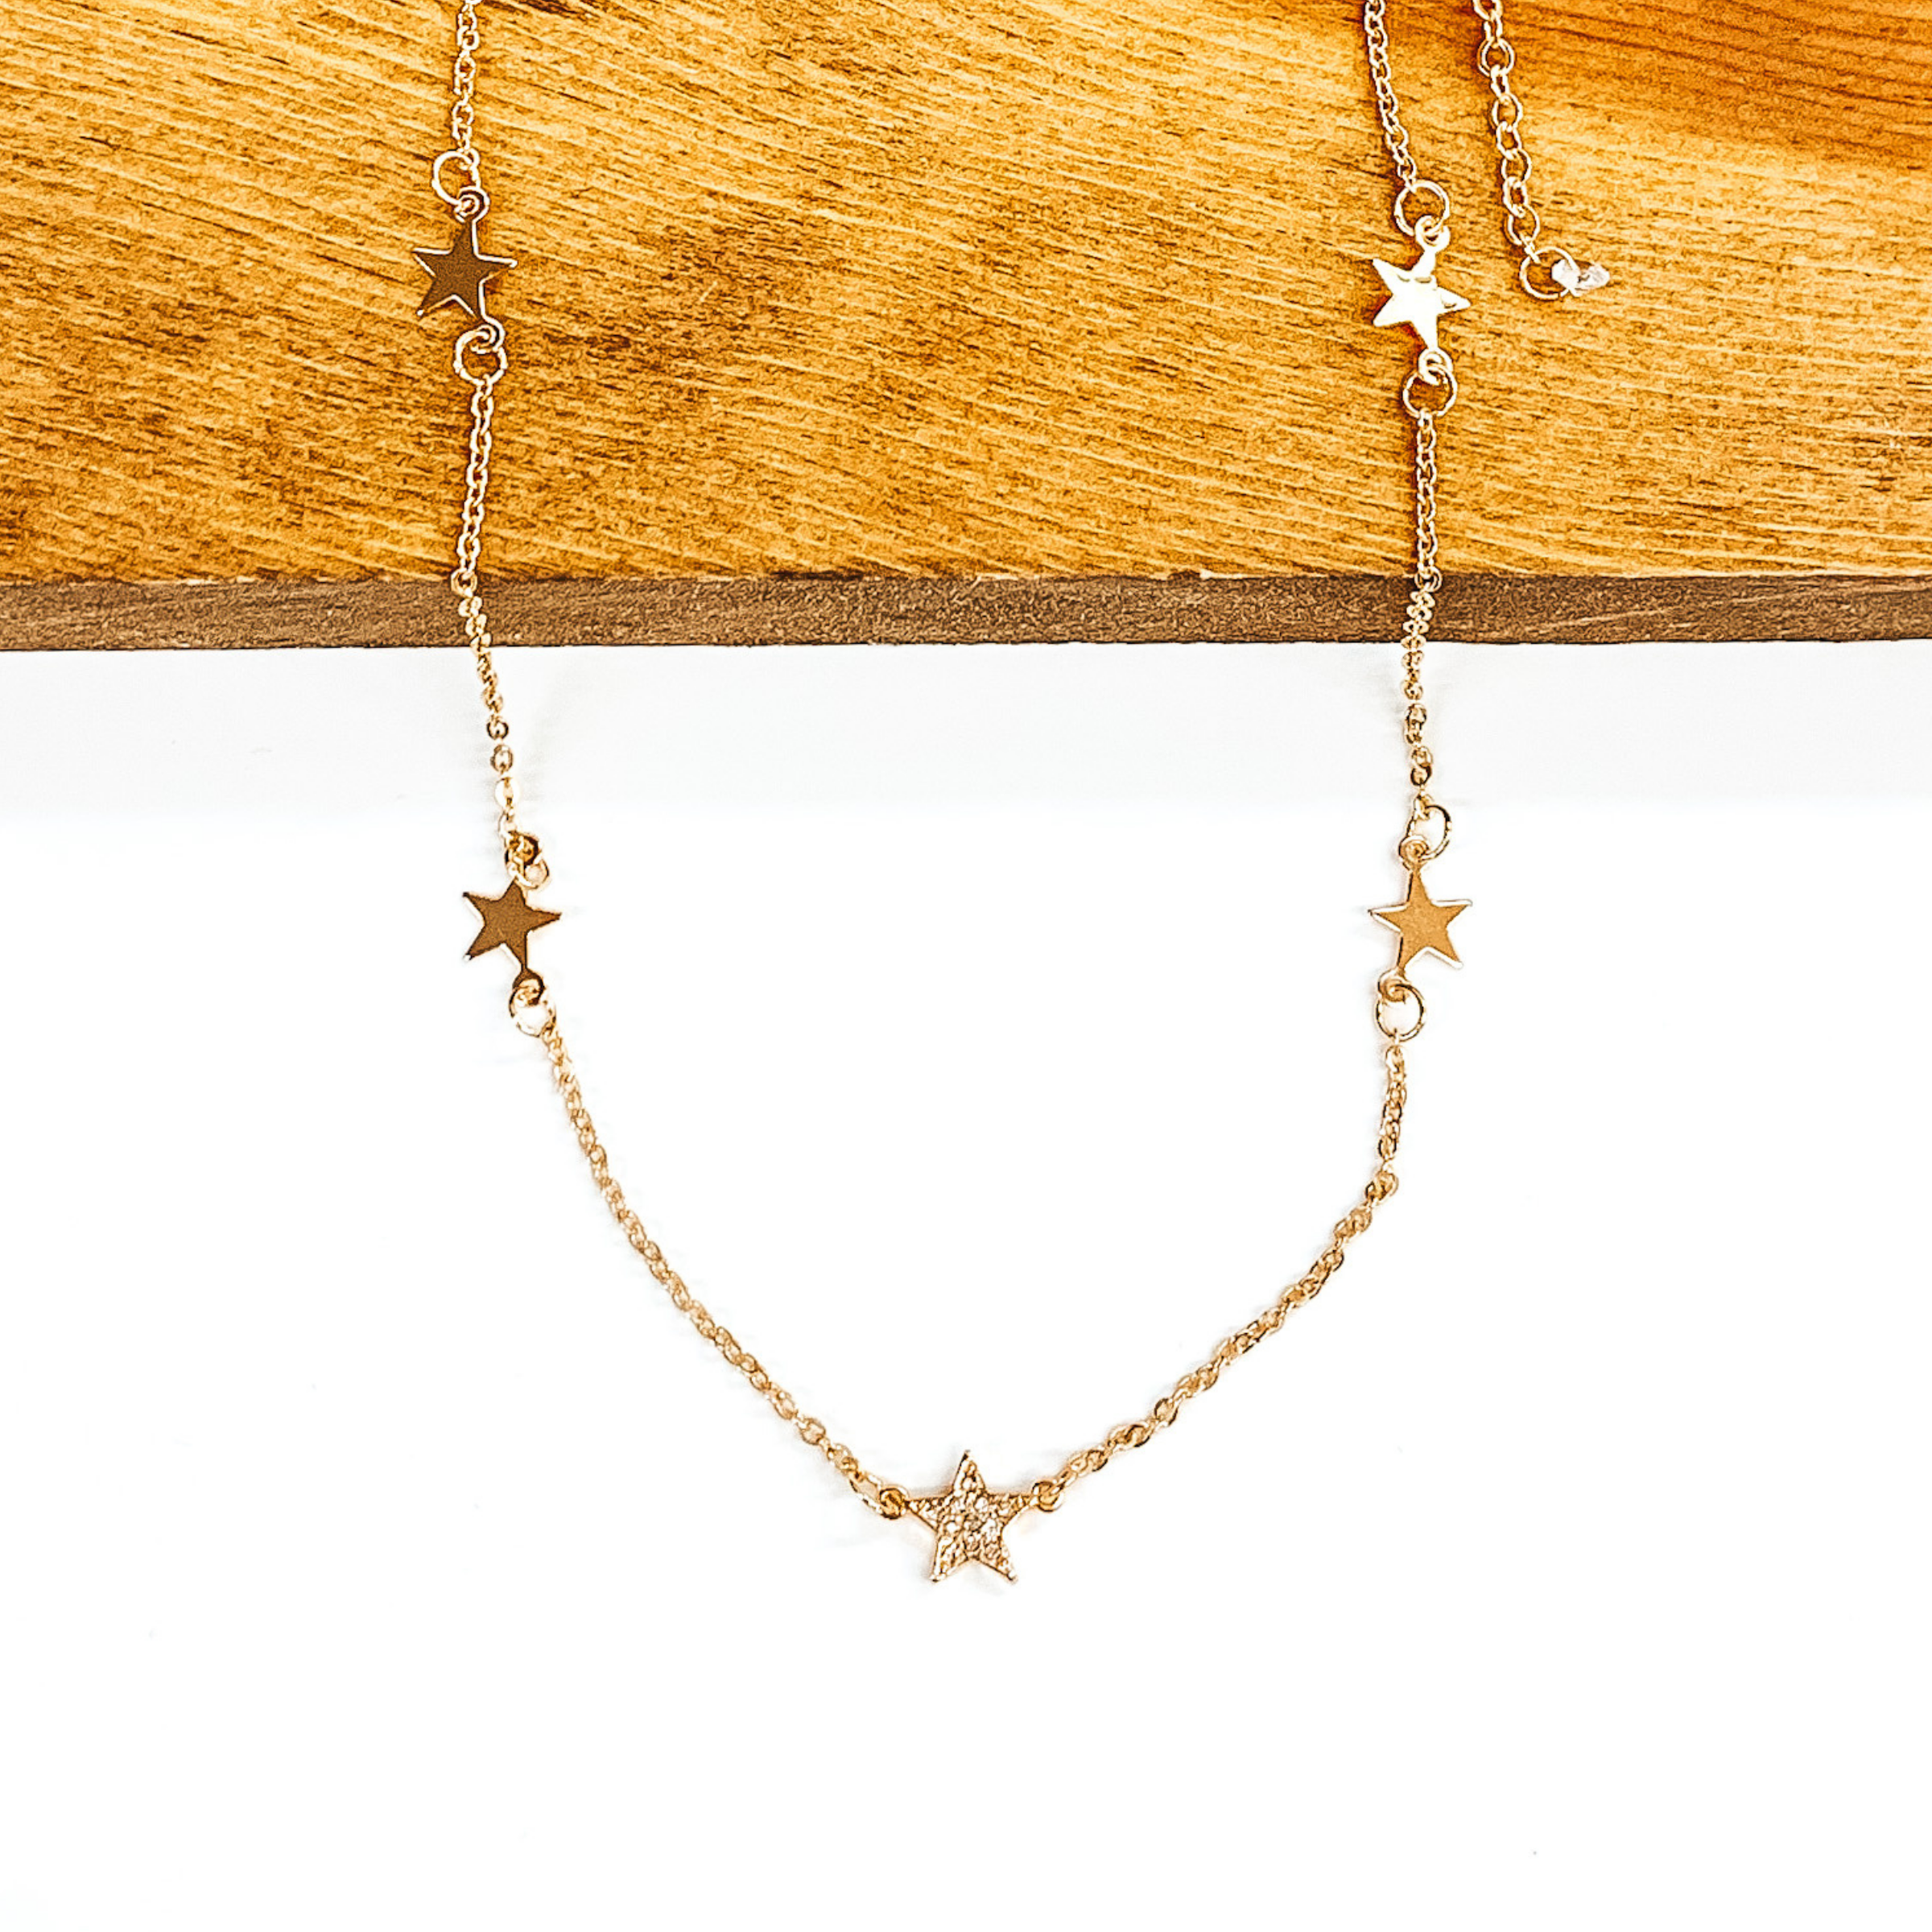 Gold chained necklace with gold star spacers. The middle star spacer has clear crystal on it. This necklace is pictured laying partially on a piece of wood on a white background.